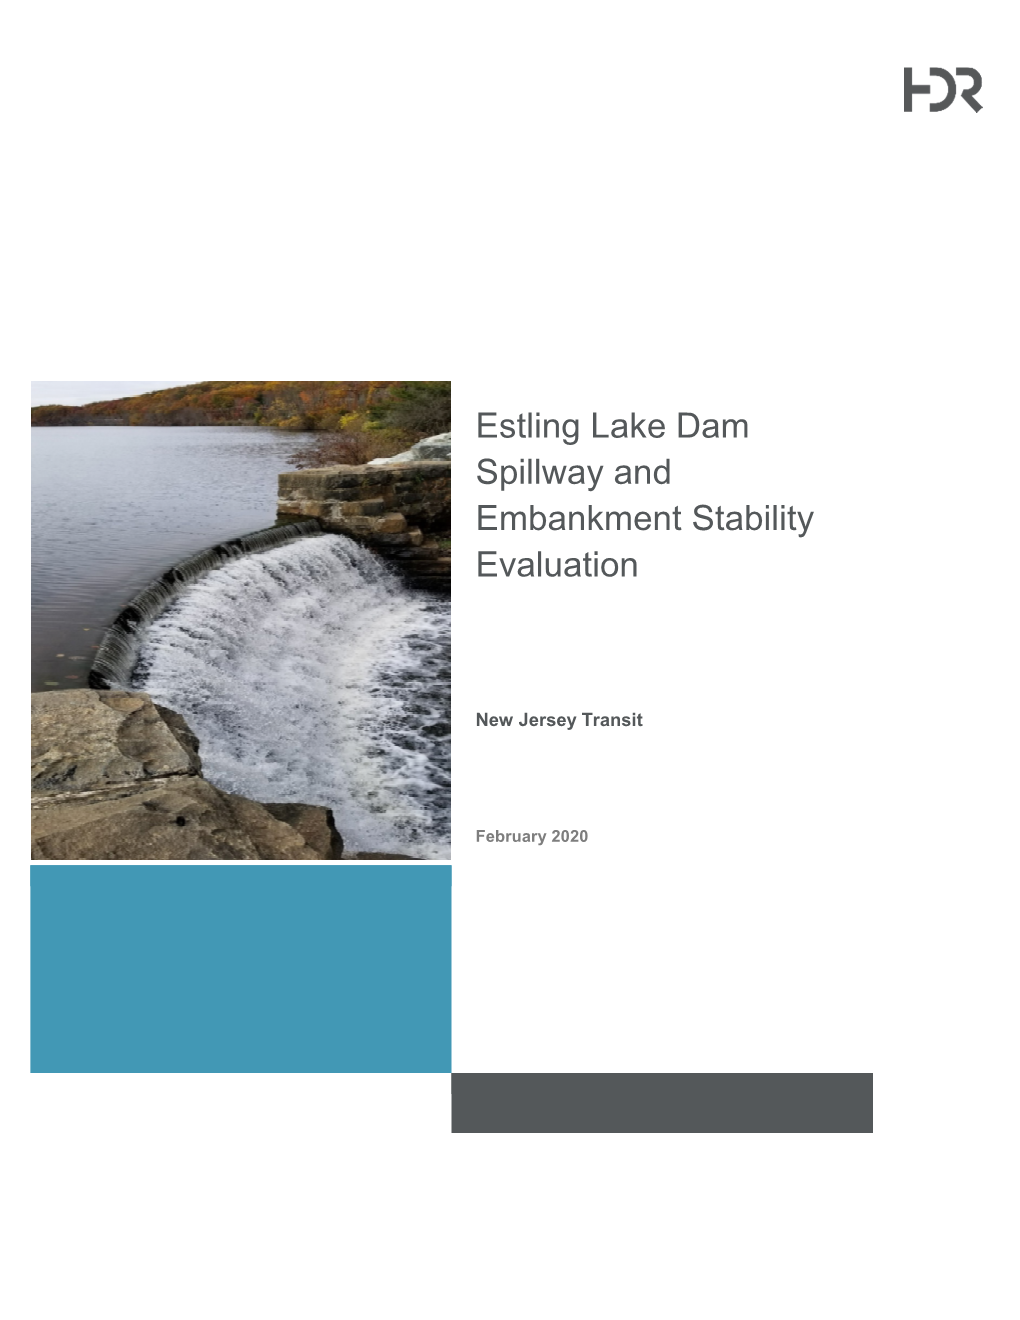 Estling Lake Dam Spillway and Embankment Stability Evaluation